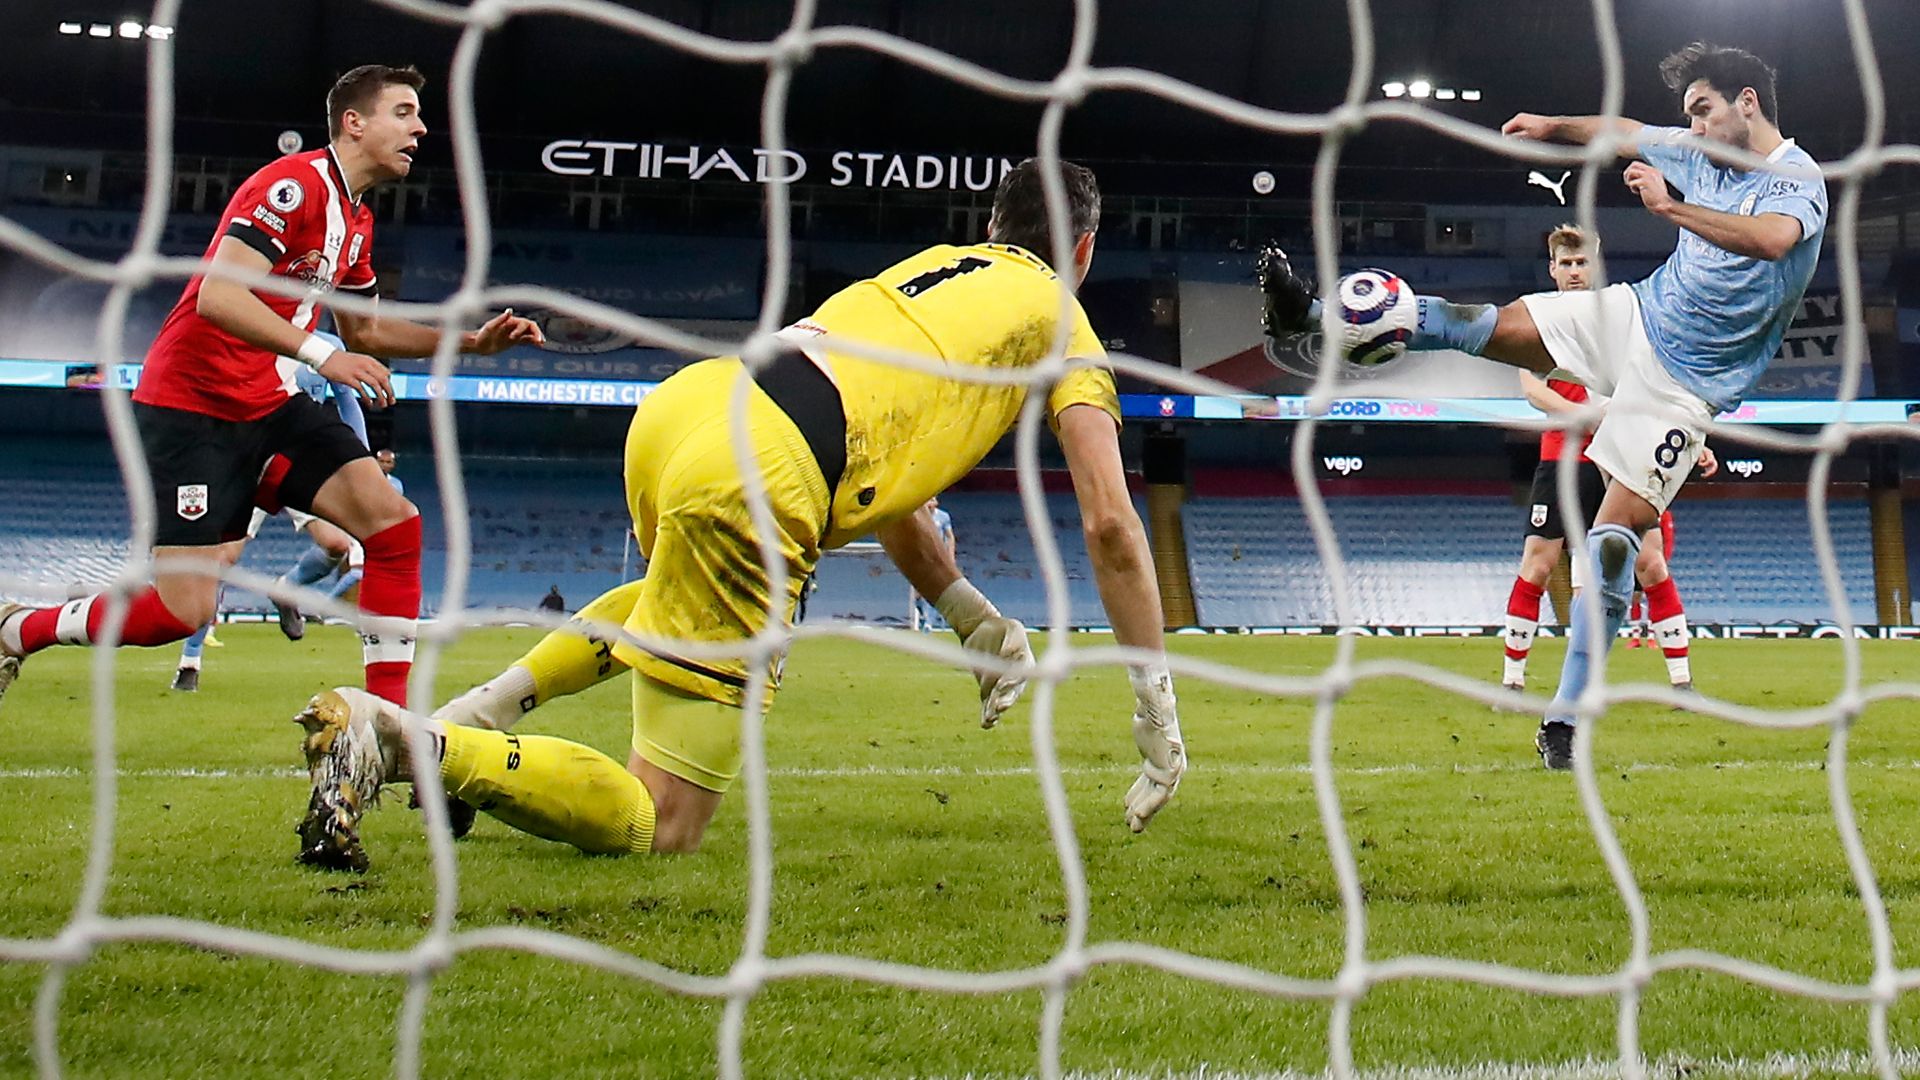 'The grass is not good' - Pep's Etihad pitch concerns